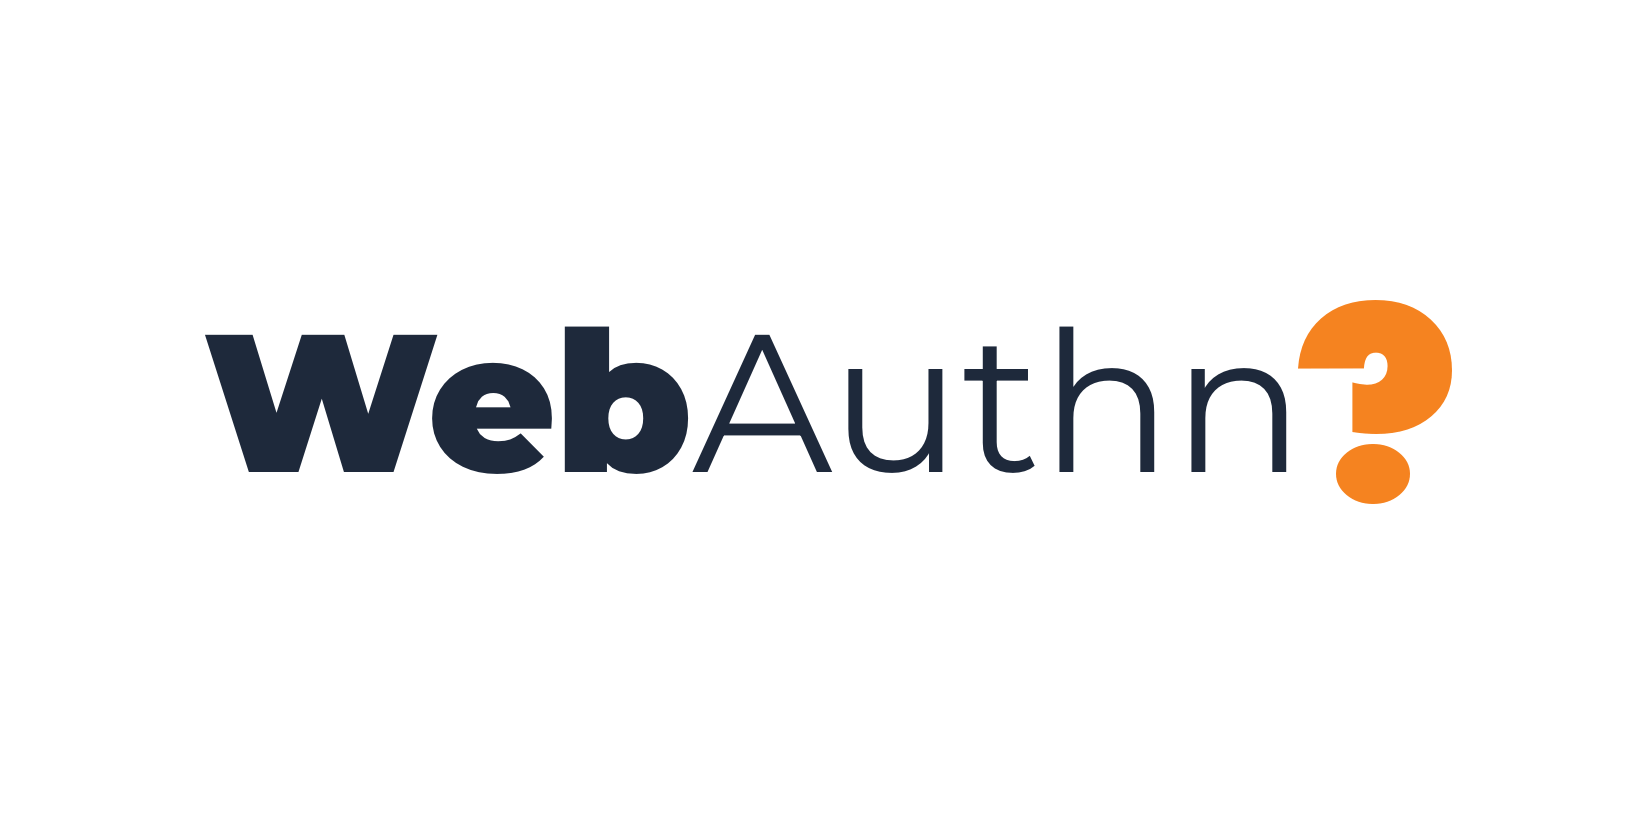 What is WebAuthn and why should you care?